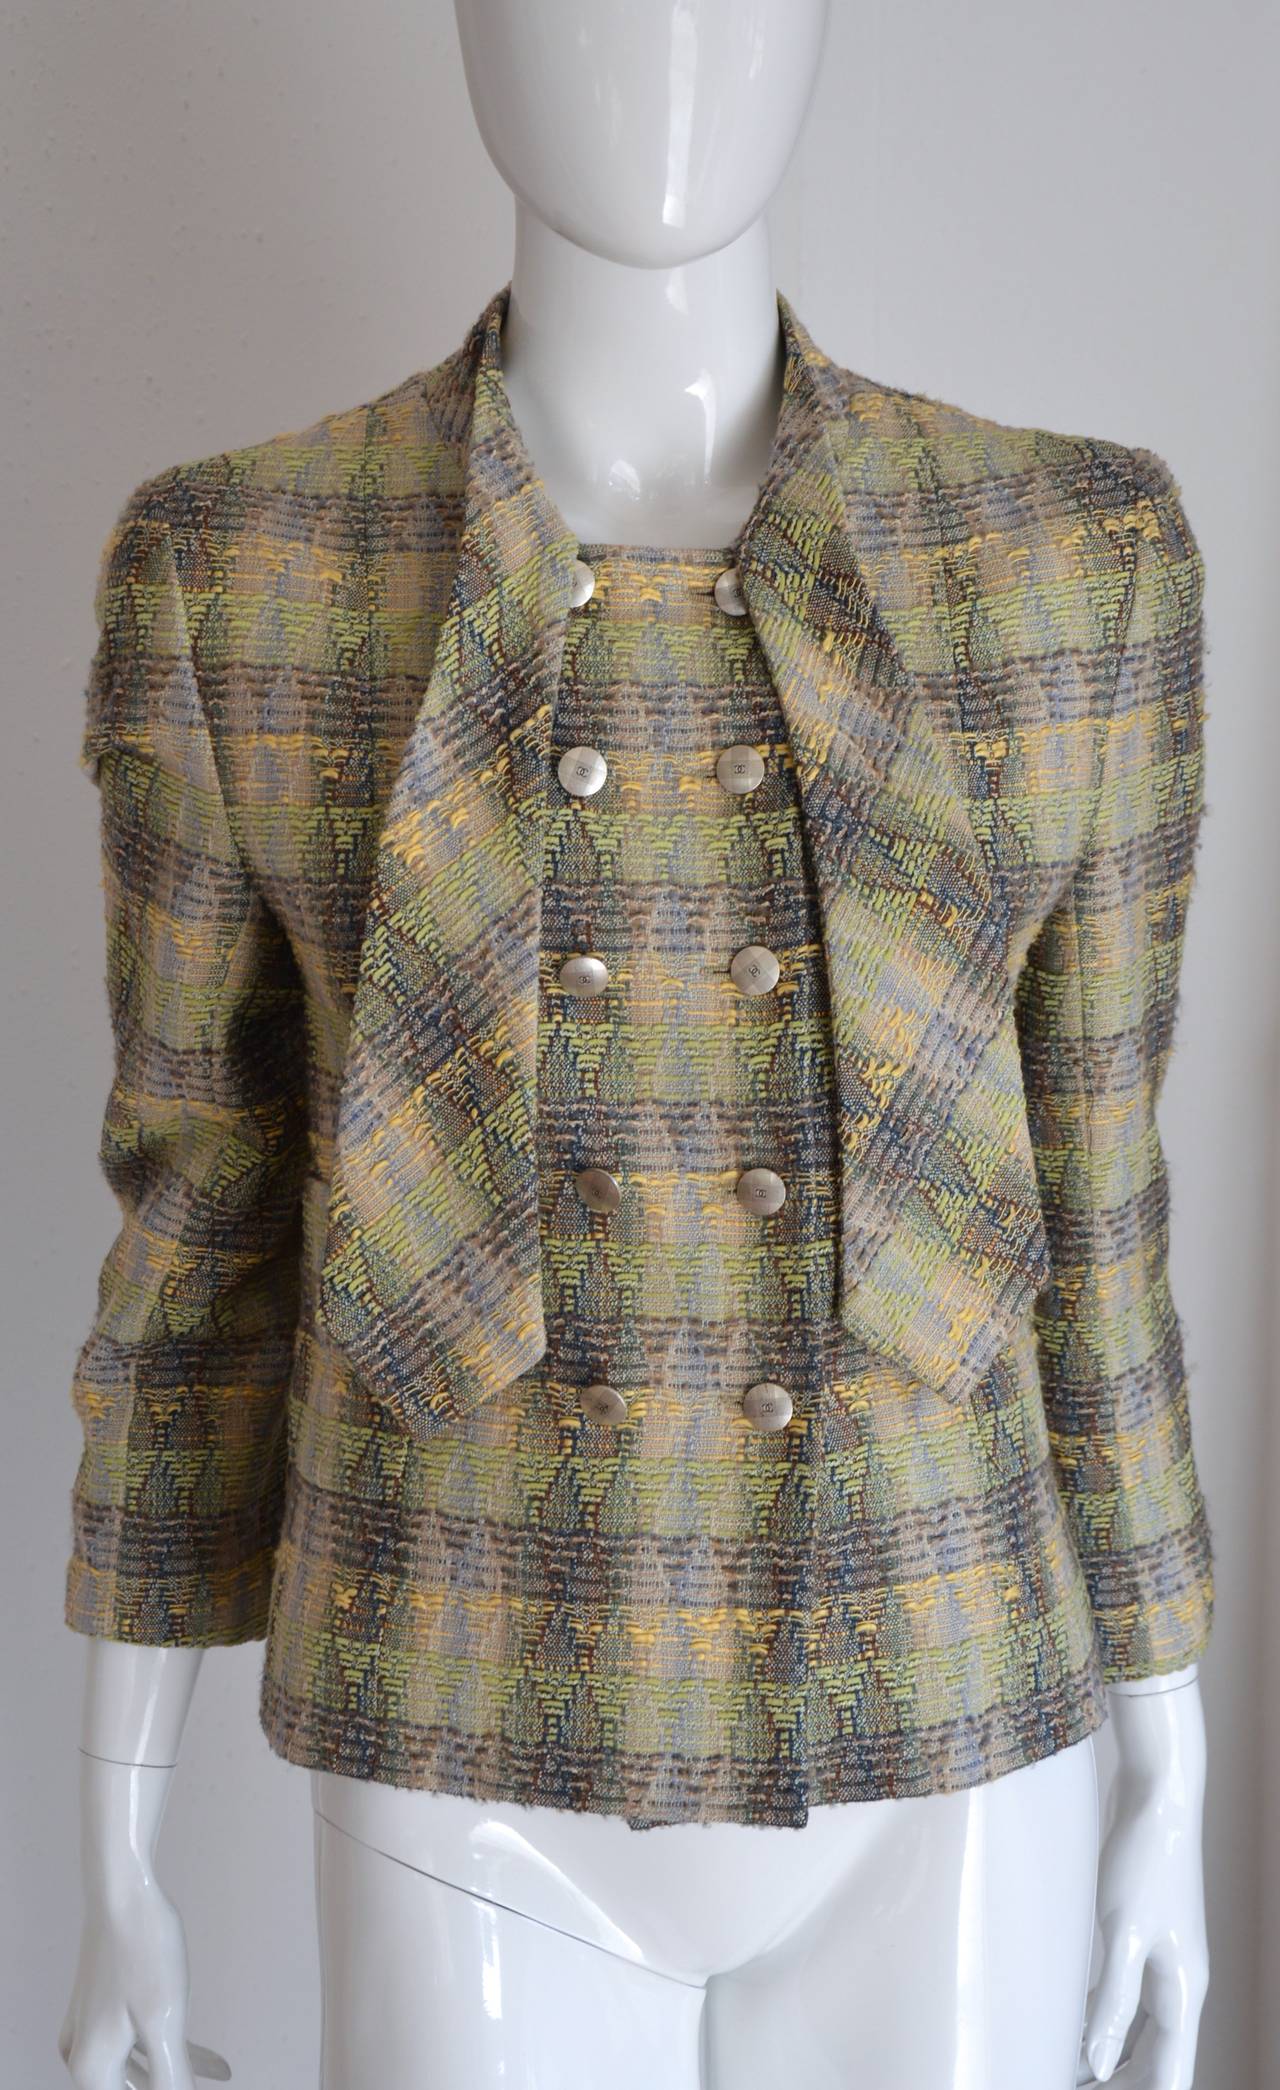 The very chic of Chanel in this cool tie-up jacket. Classy and modern with the graphic use of tweed, in the the tones kaki and beige.
CC patinated silver buttons, front and cuffs. Fully silk lining.